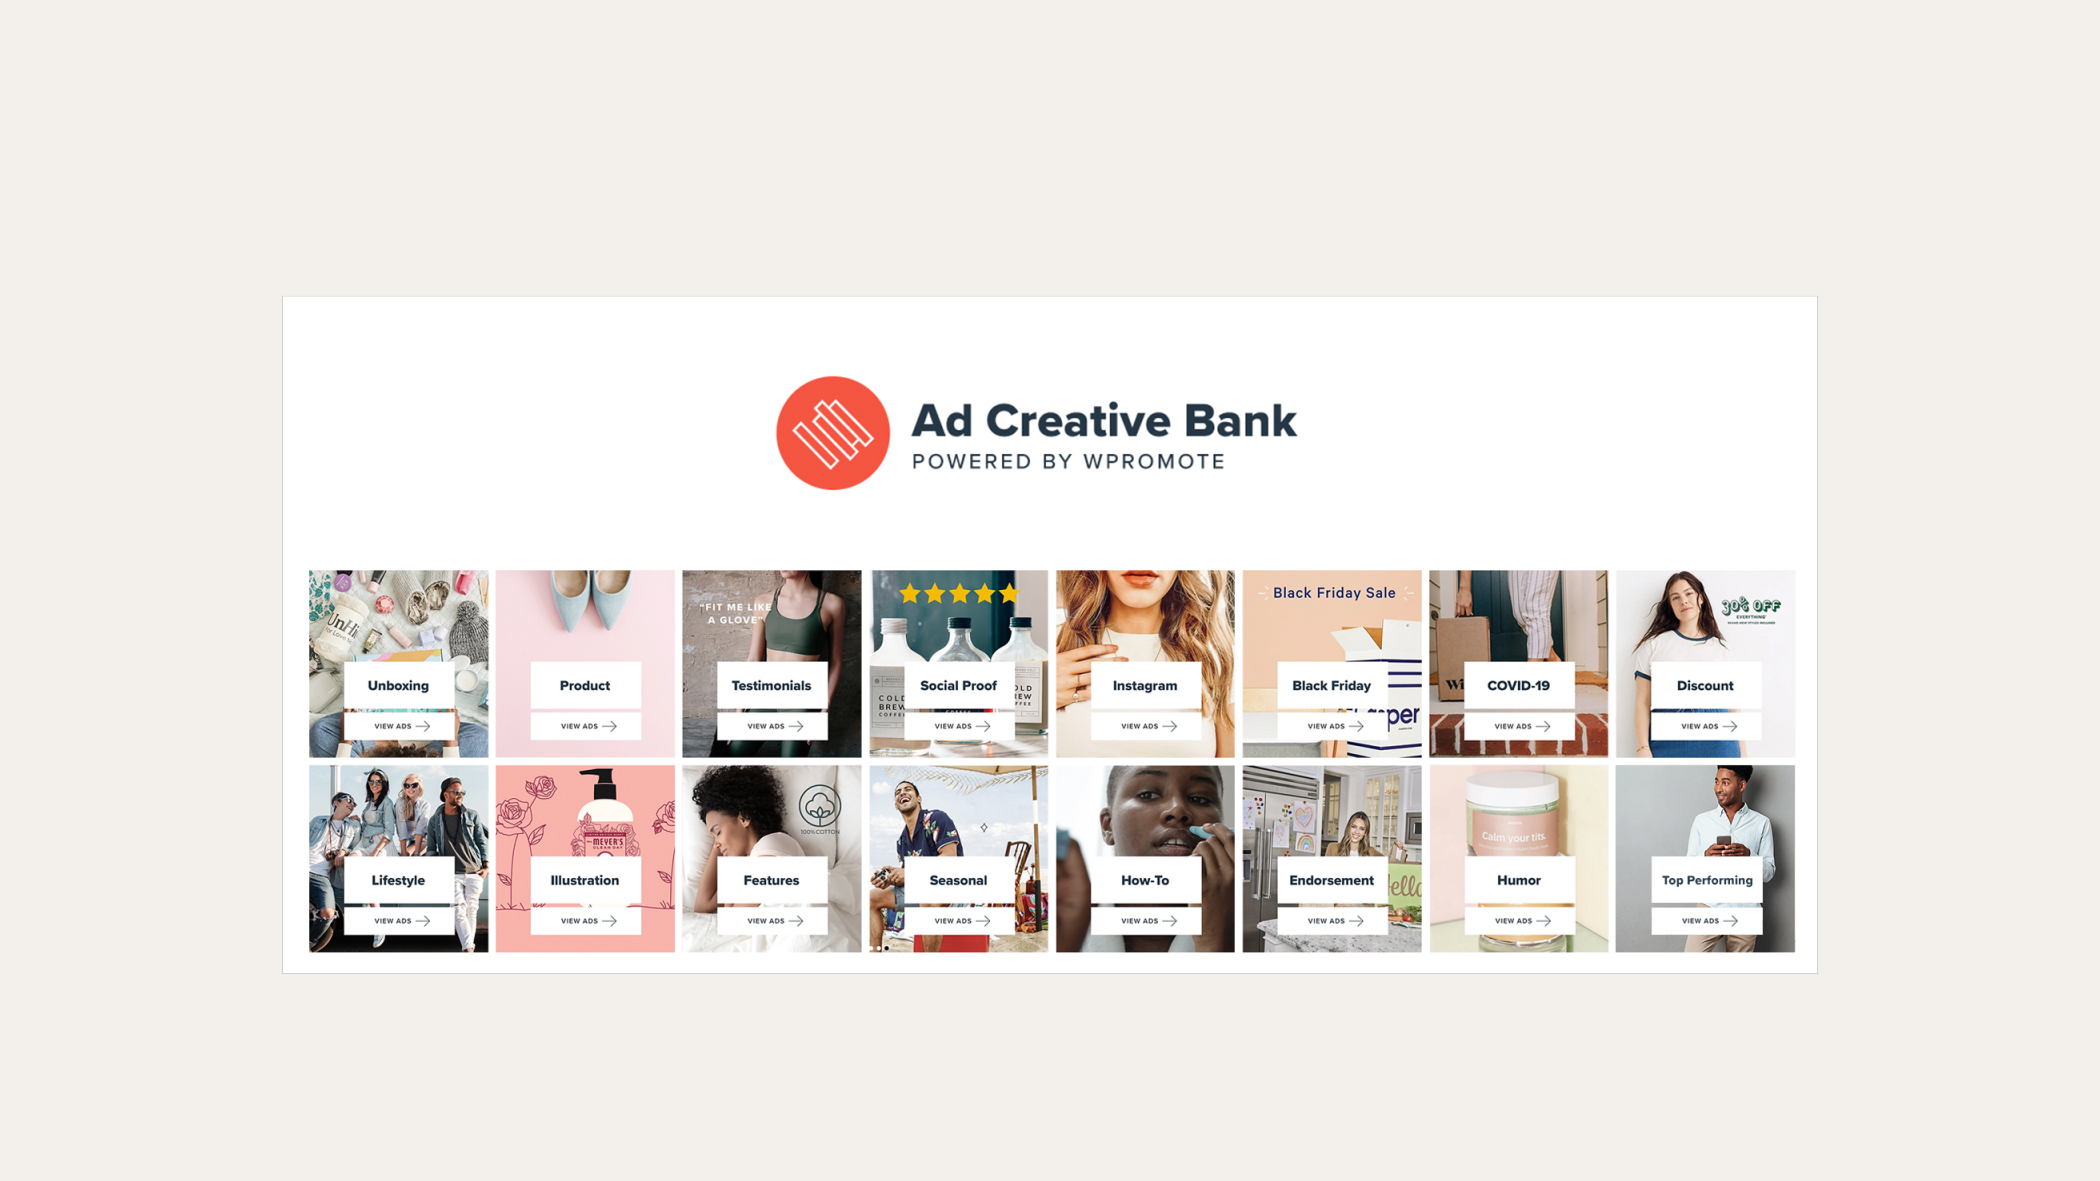 Looking for Creative Inspiration? Meet The Ad Creative Bank ...